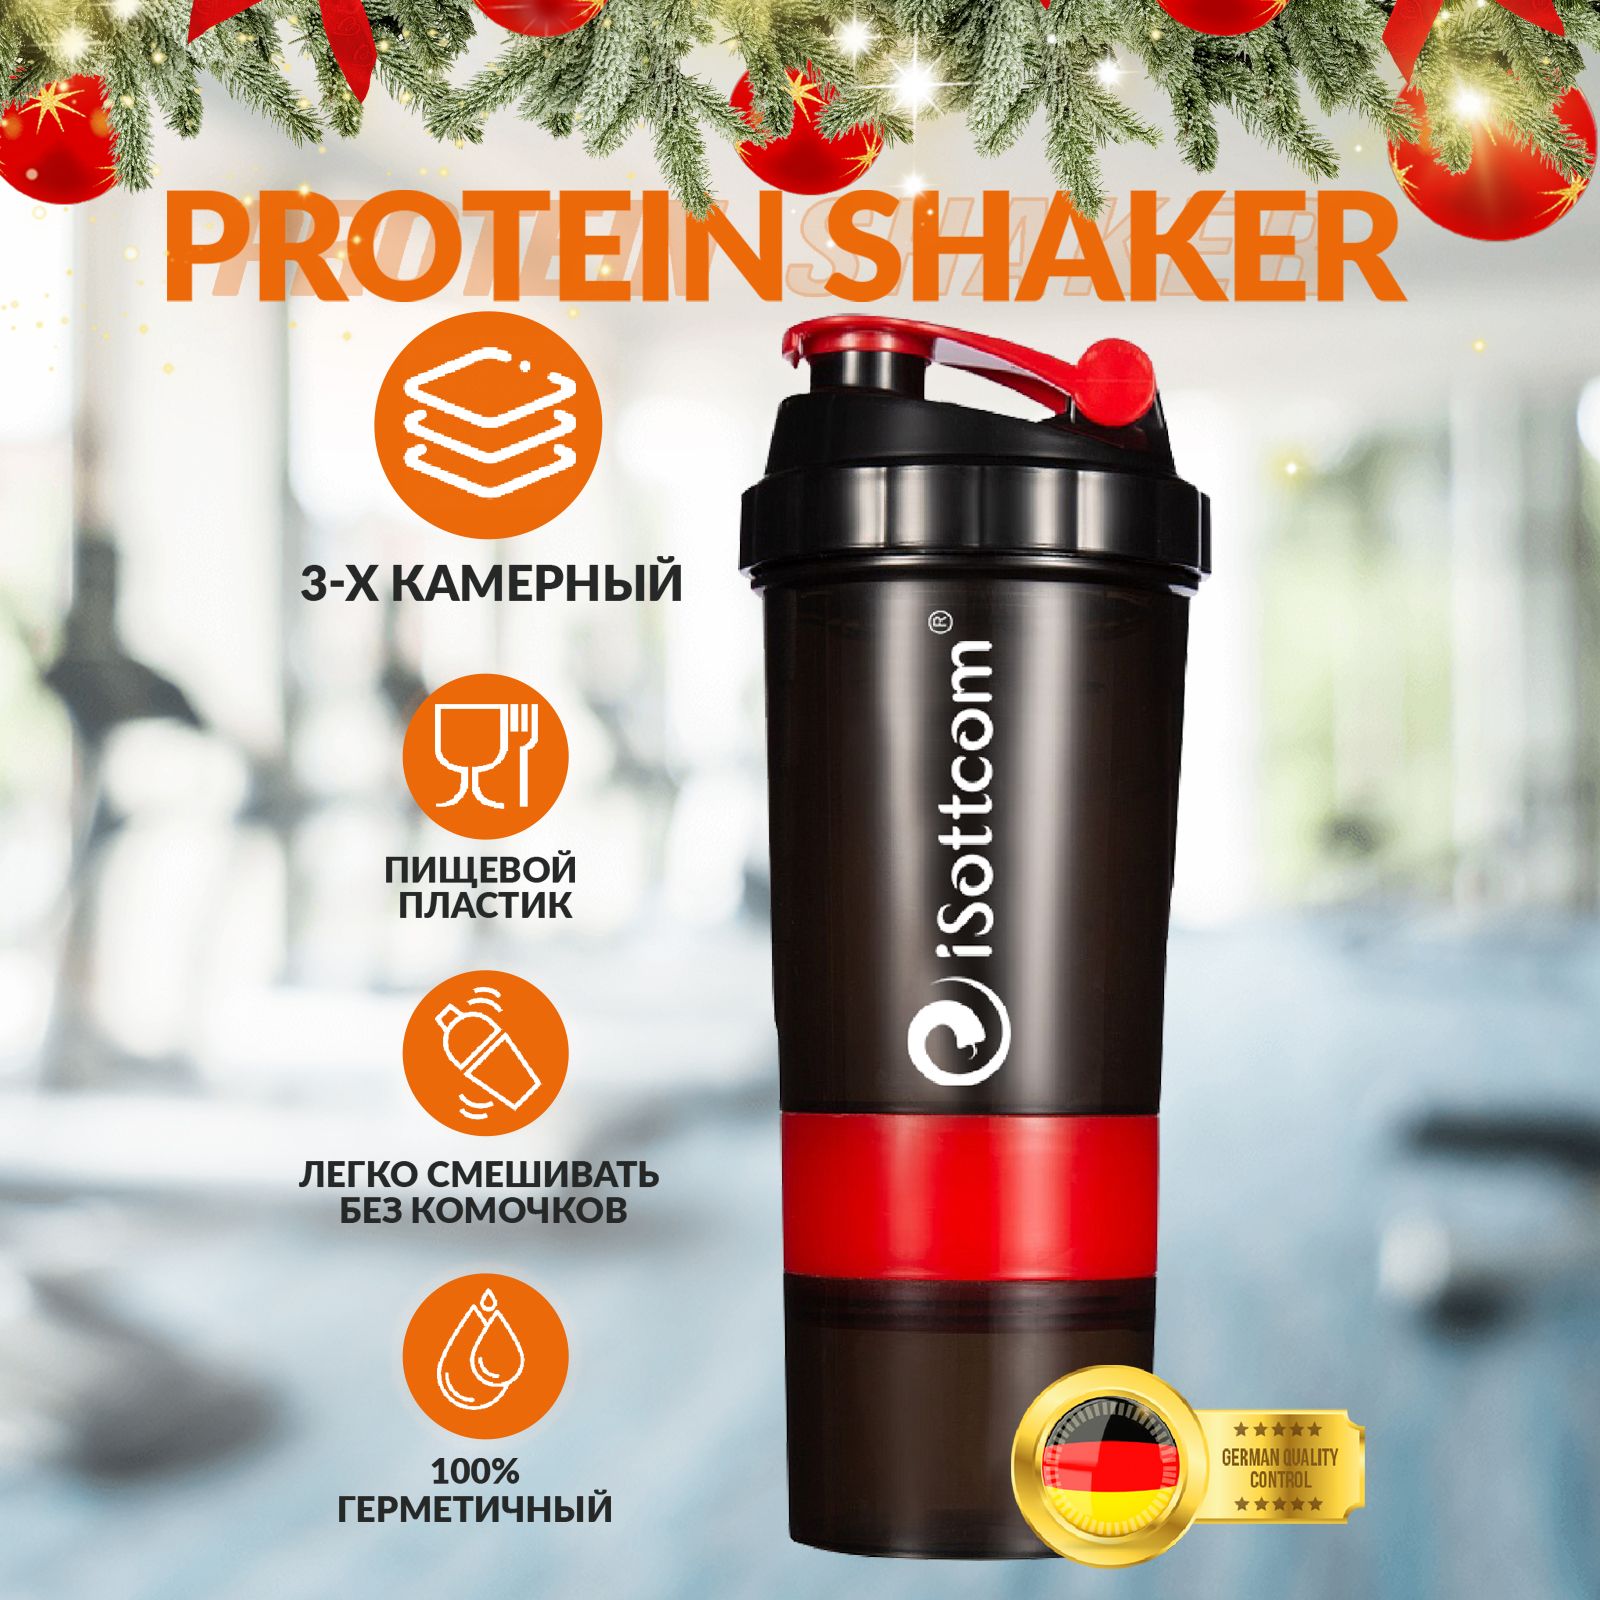 Protein Mixer – iSottcom